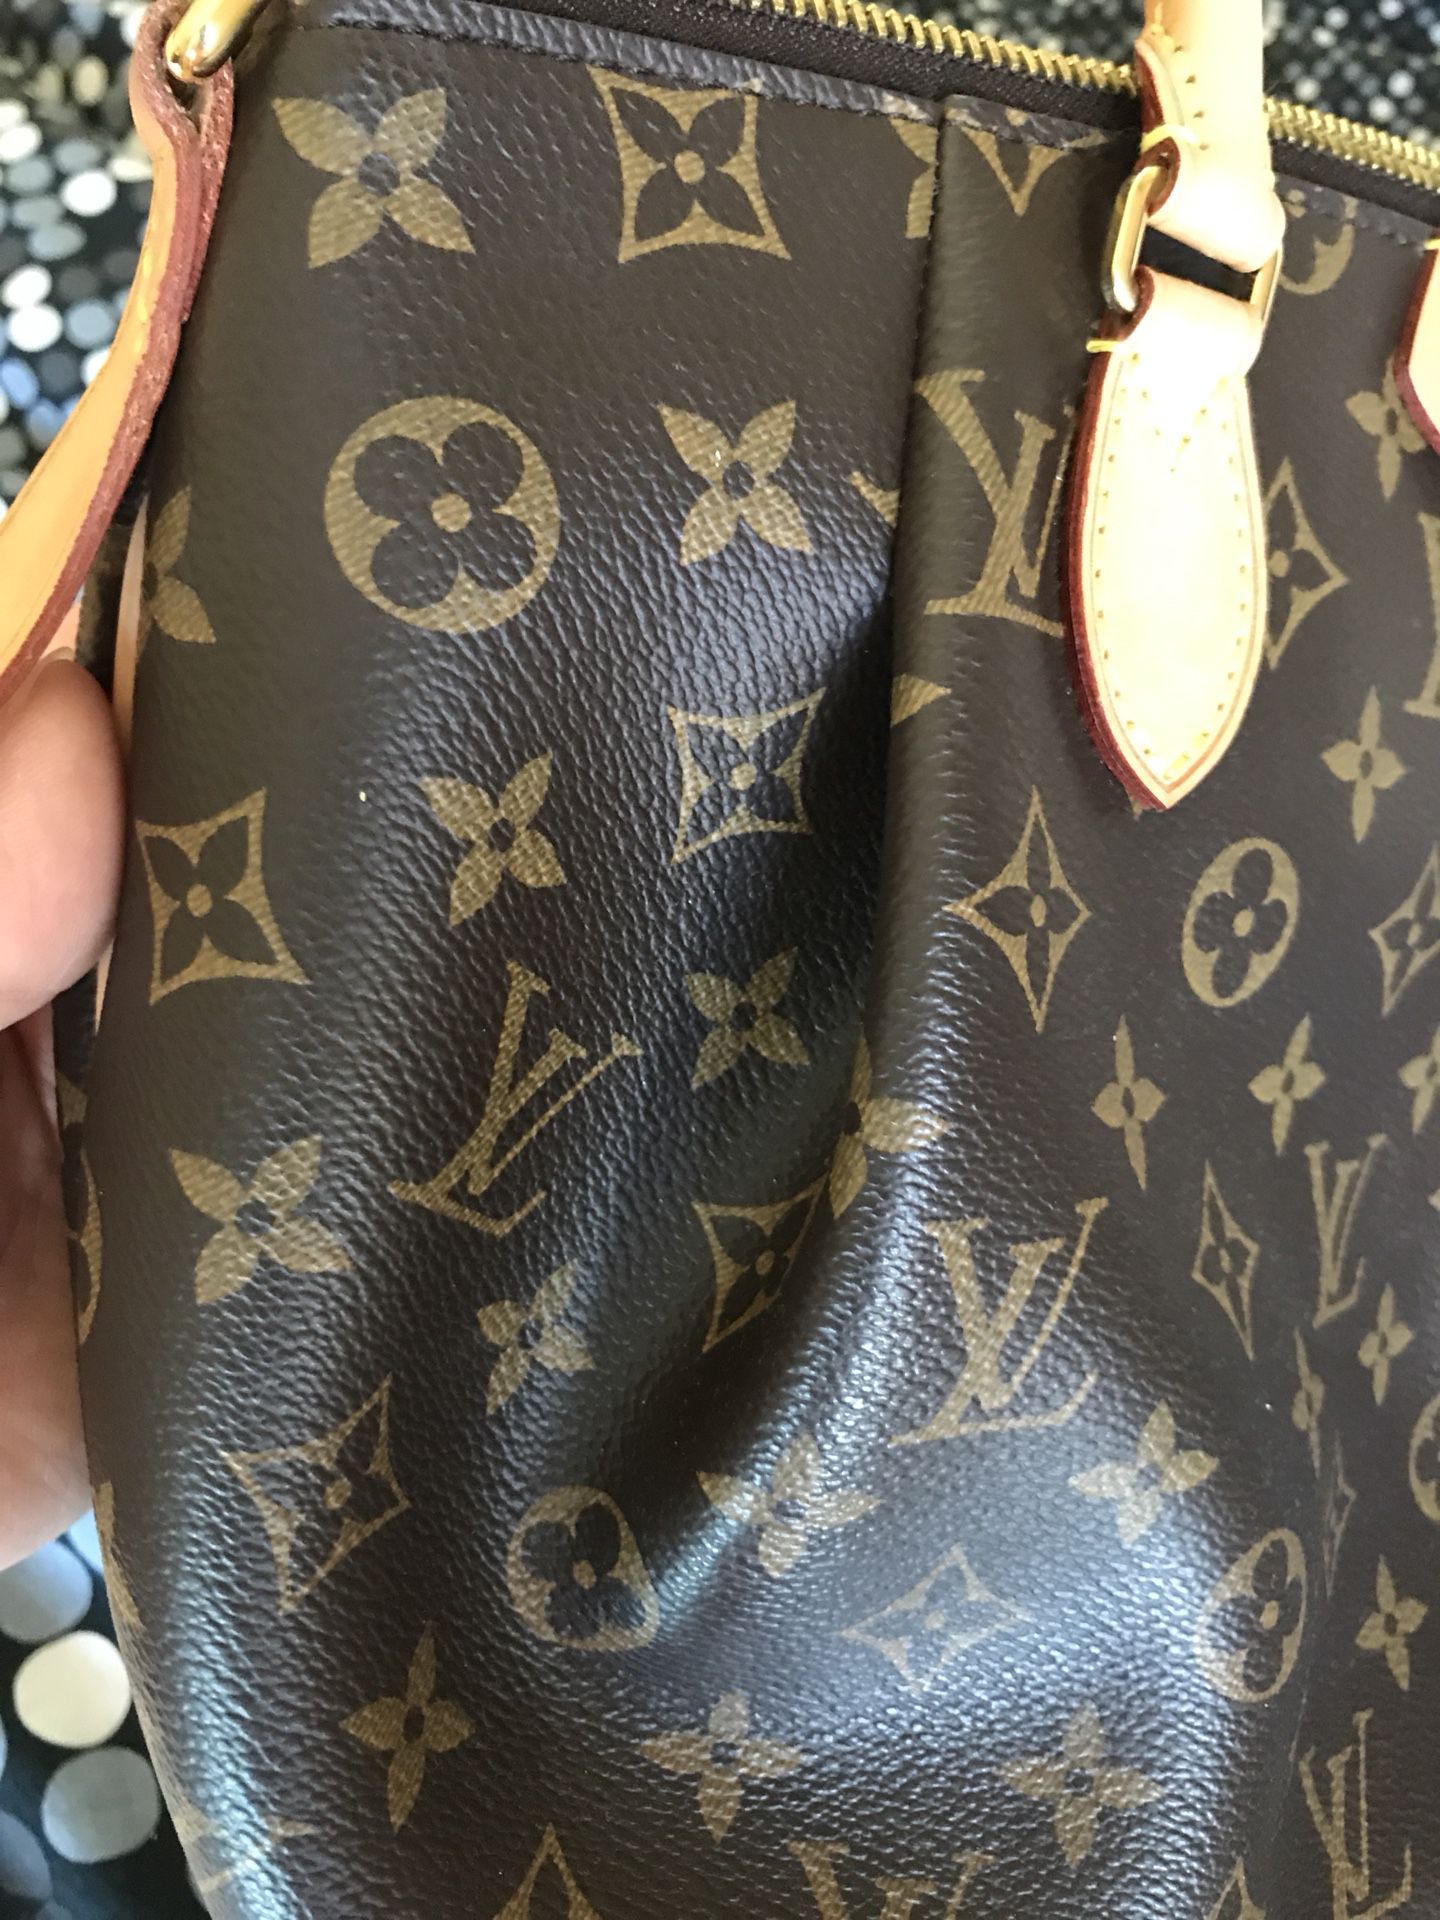 Louis Vuitton turenne pm firm price for Sale in Elk Grove, CA - OfferUp